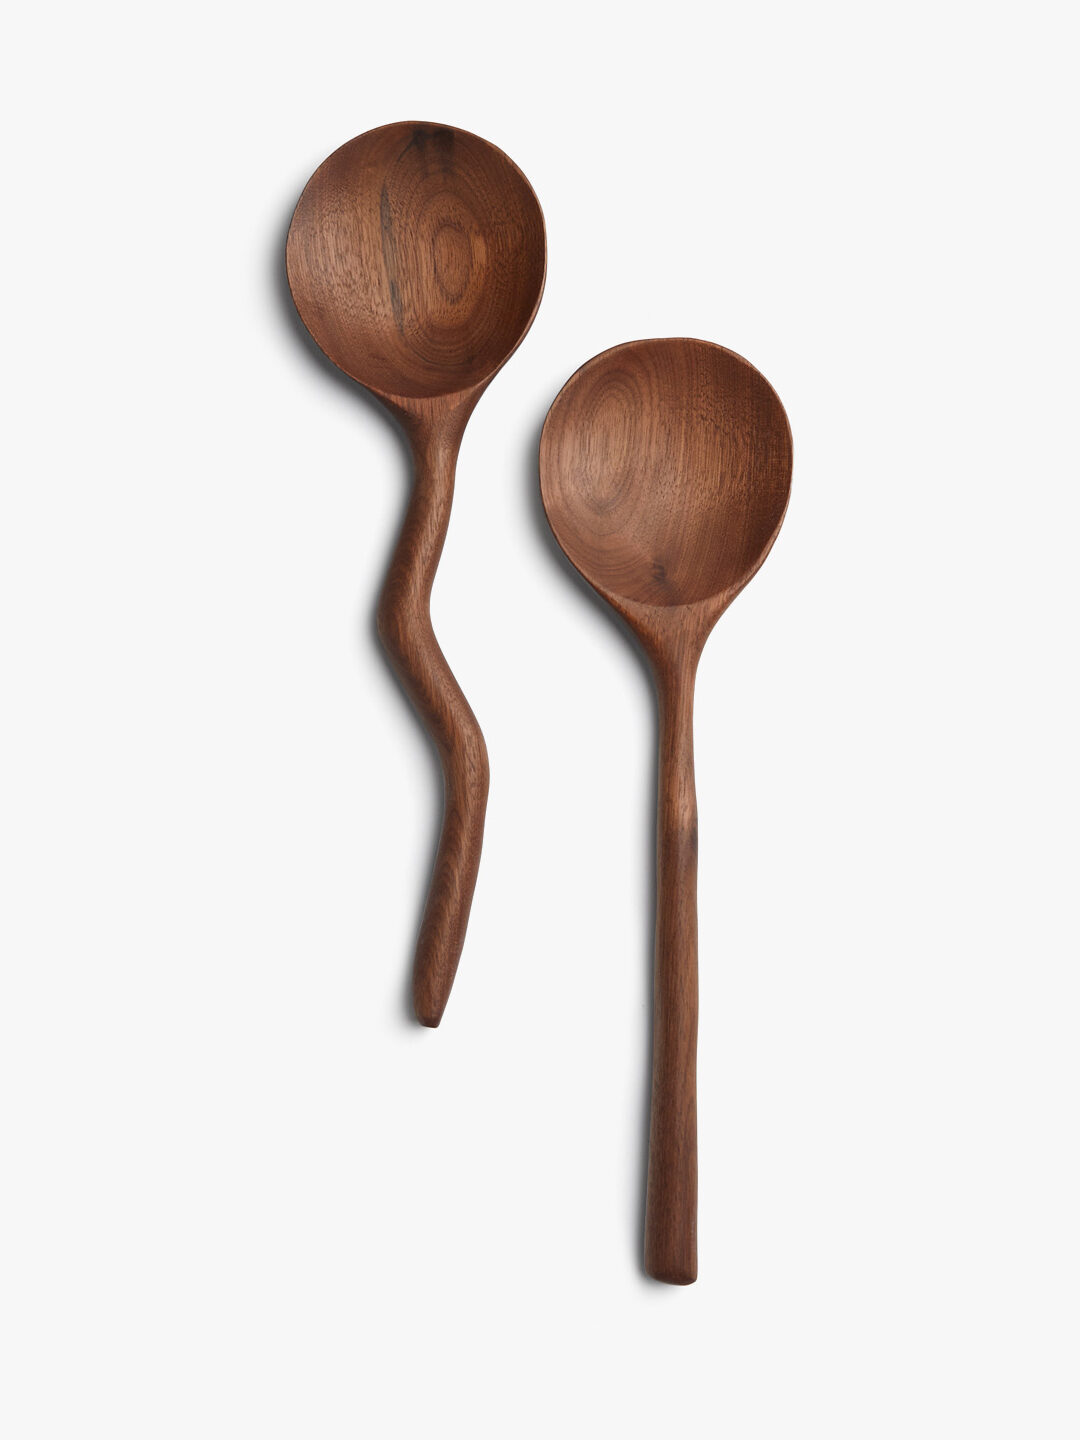 PFAS-Free Wooden Cooking Utensils from Parachute Home